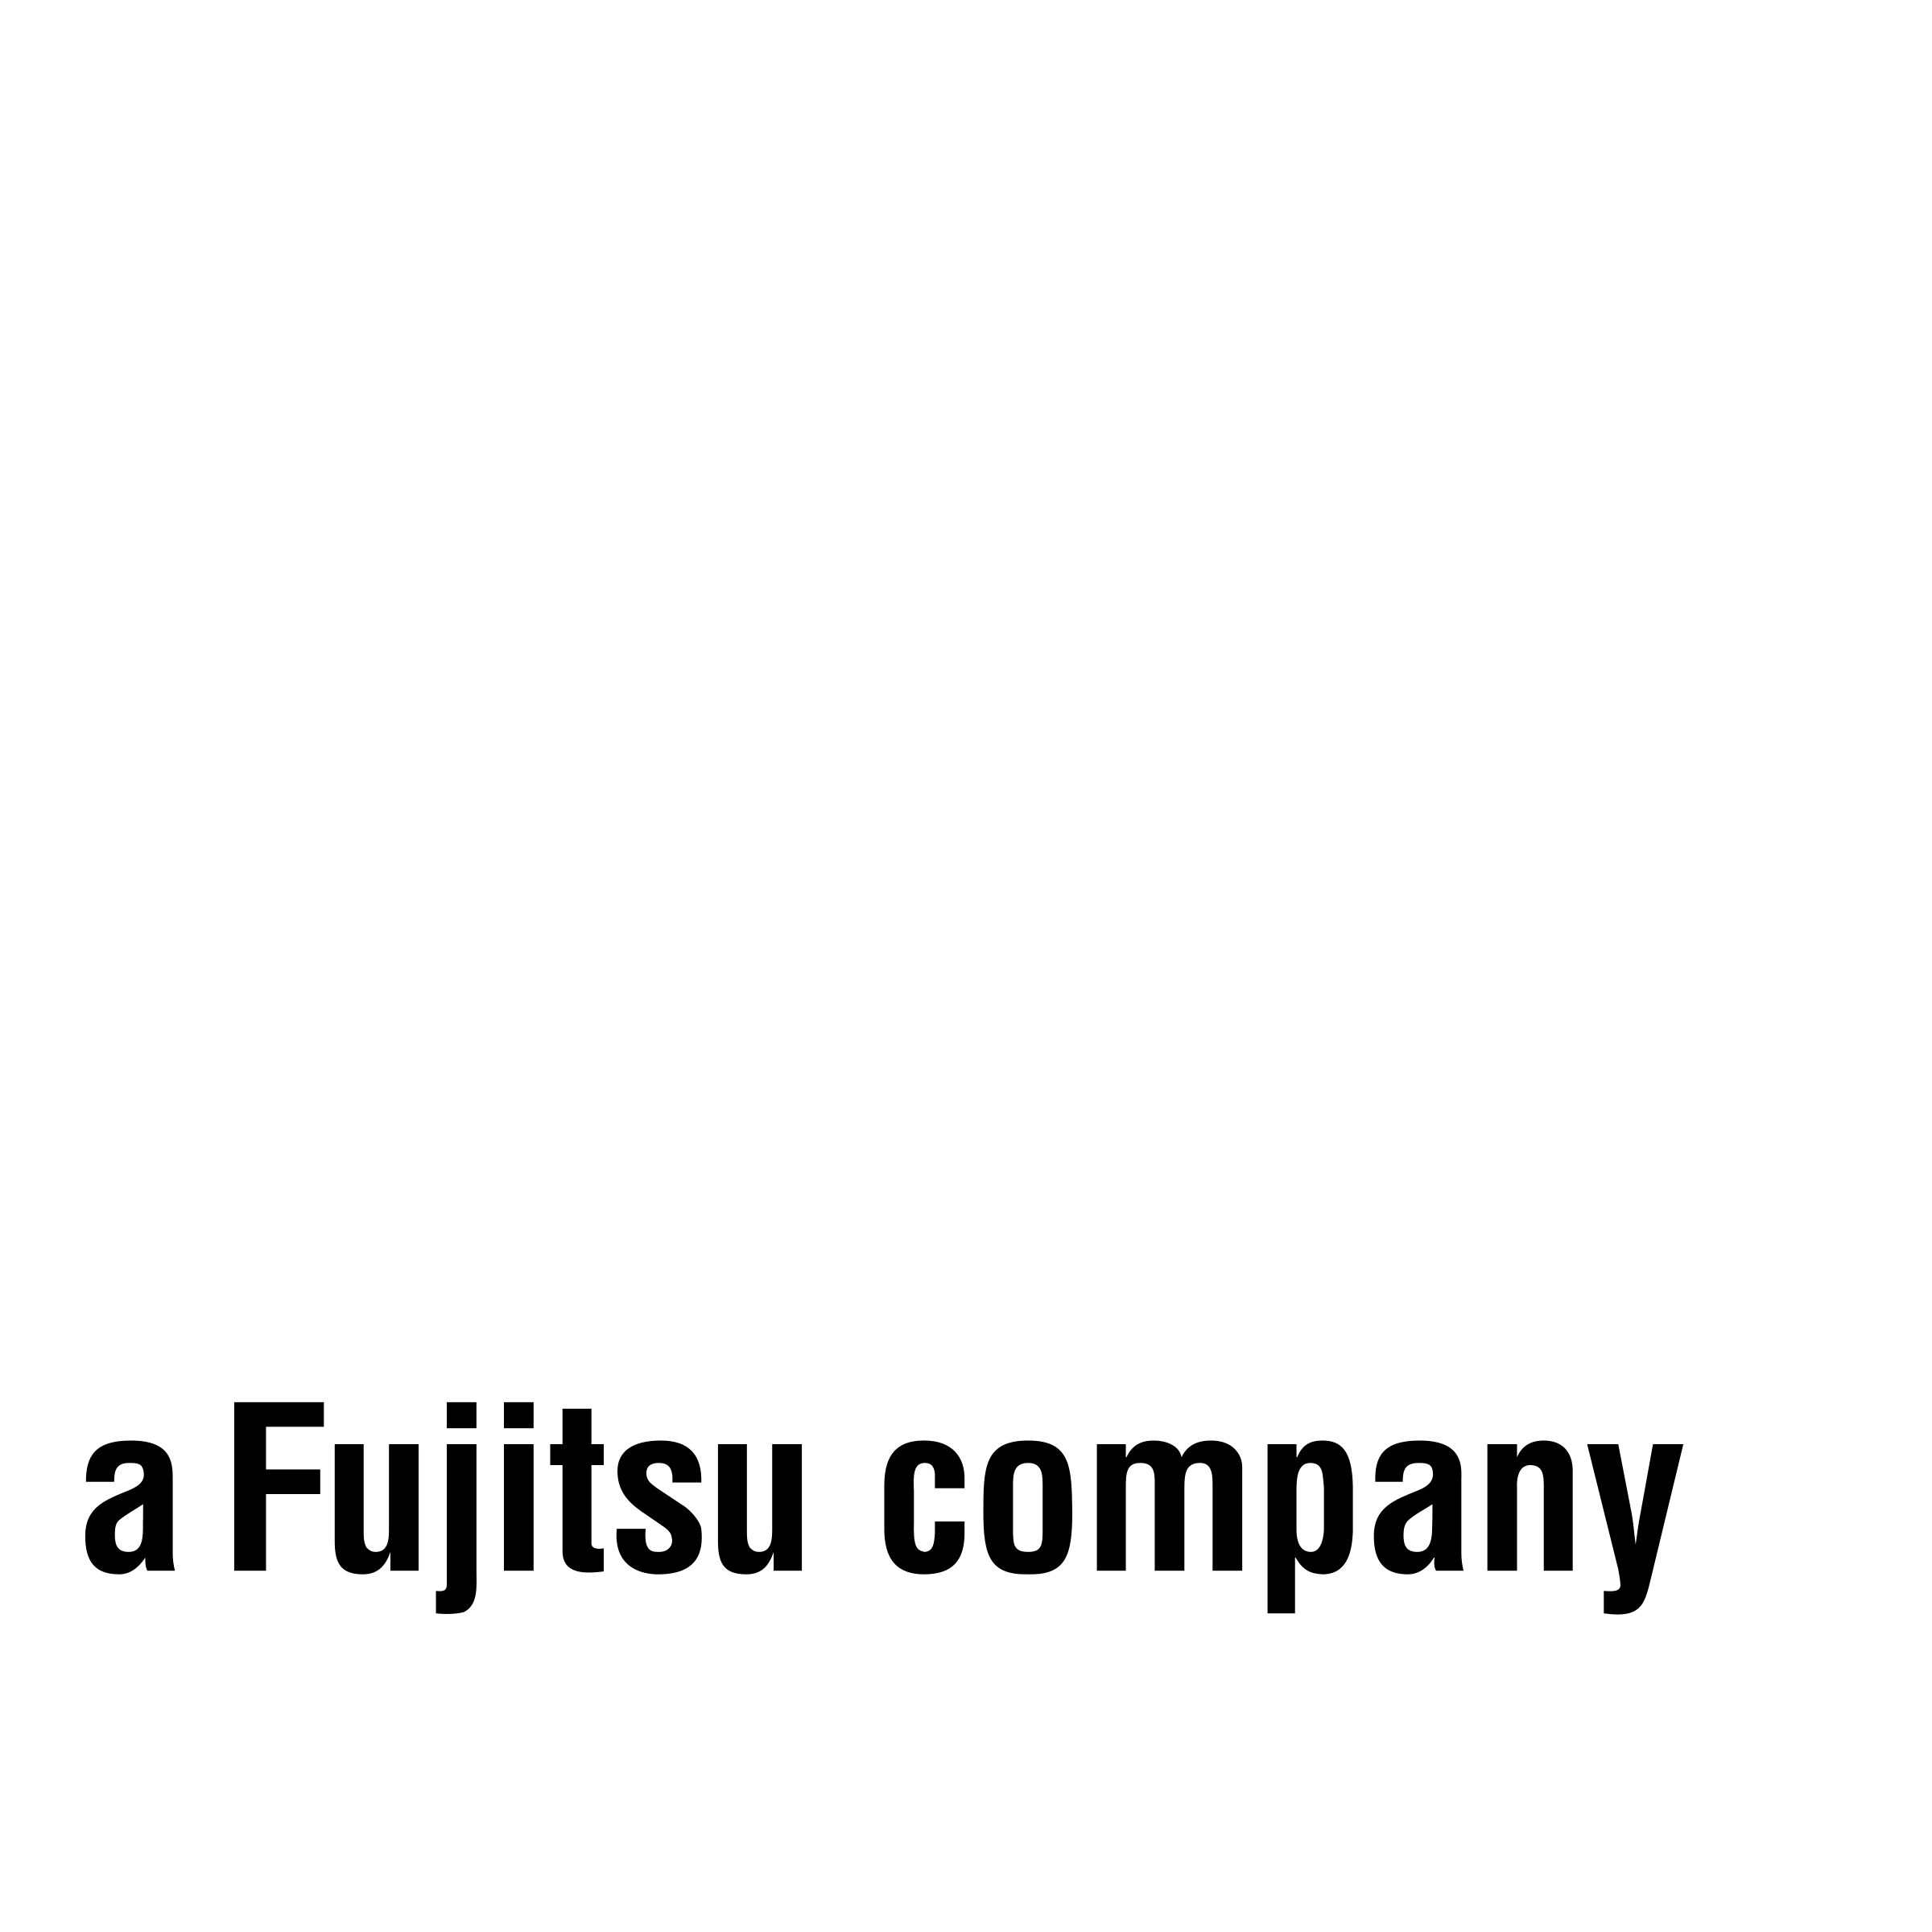 ICL Logo - ICL Logo PNG Transparent & SVG Vector - Freebie Supply